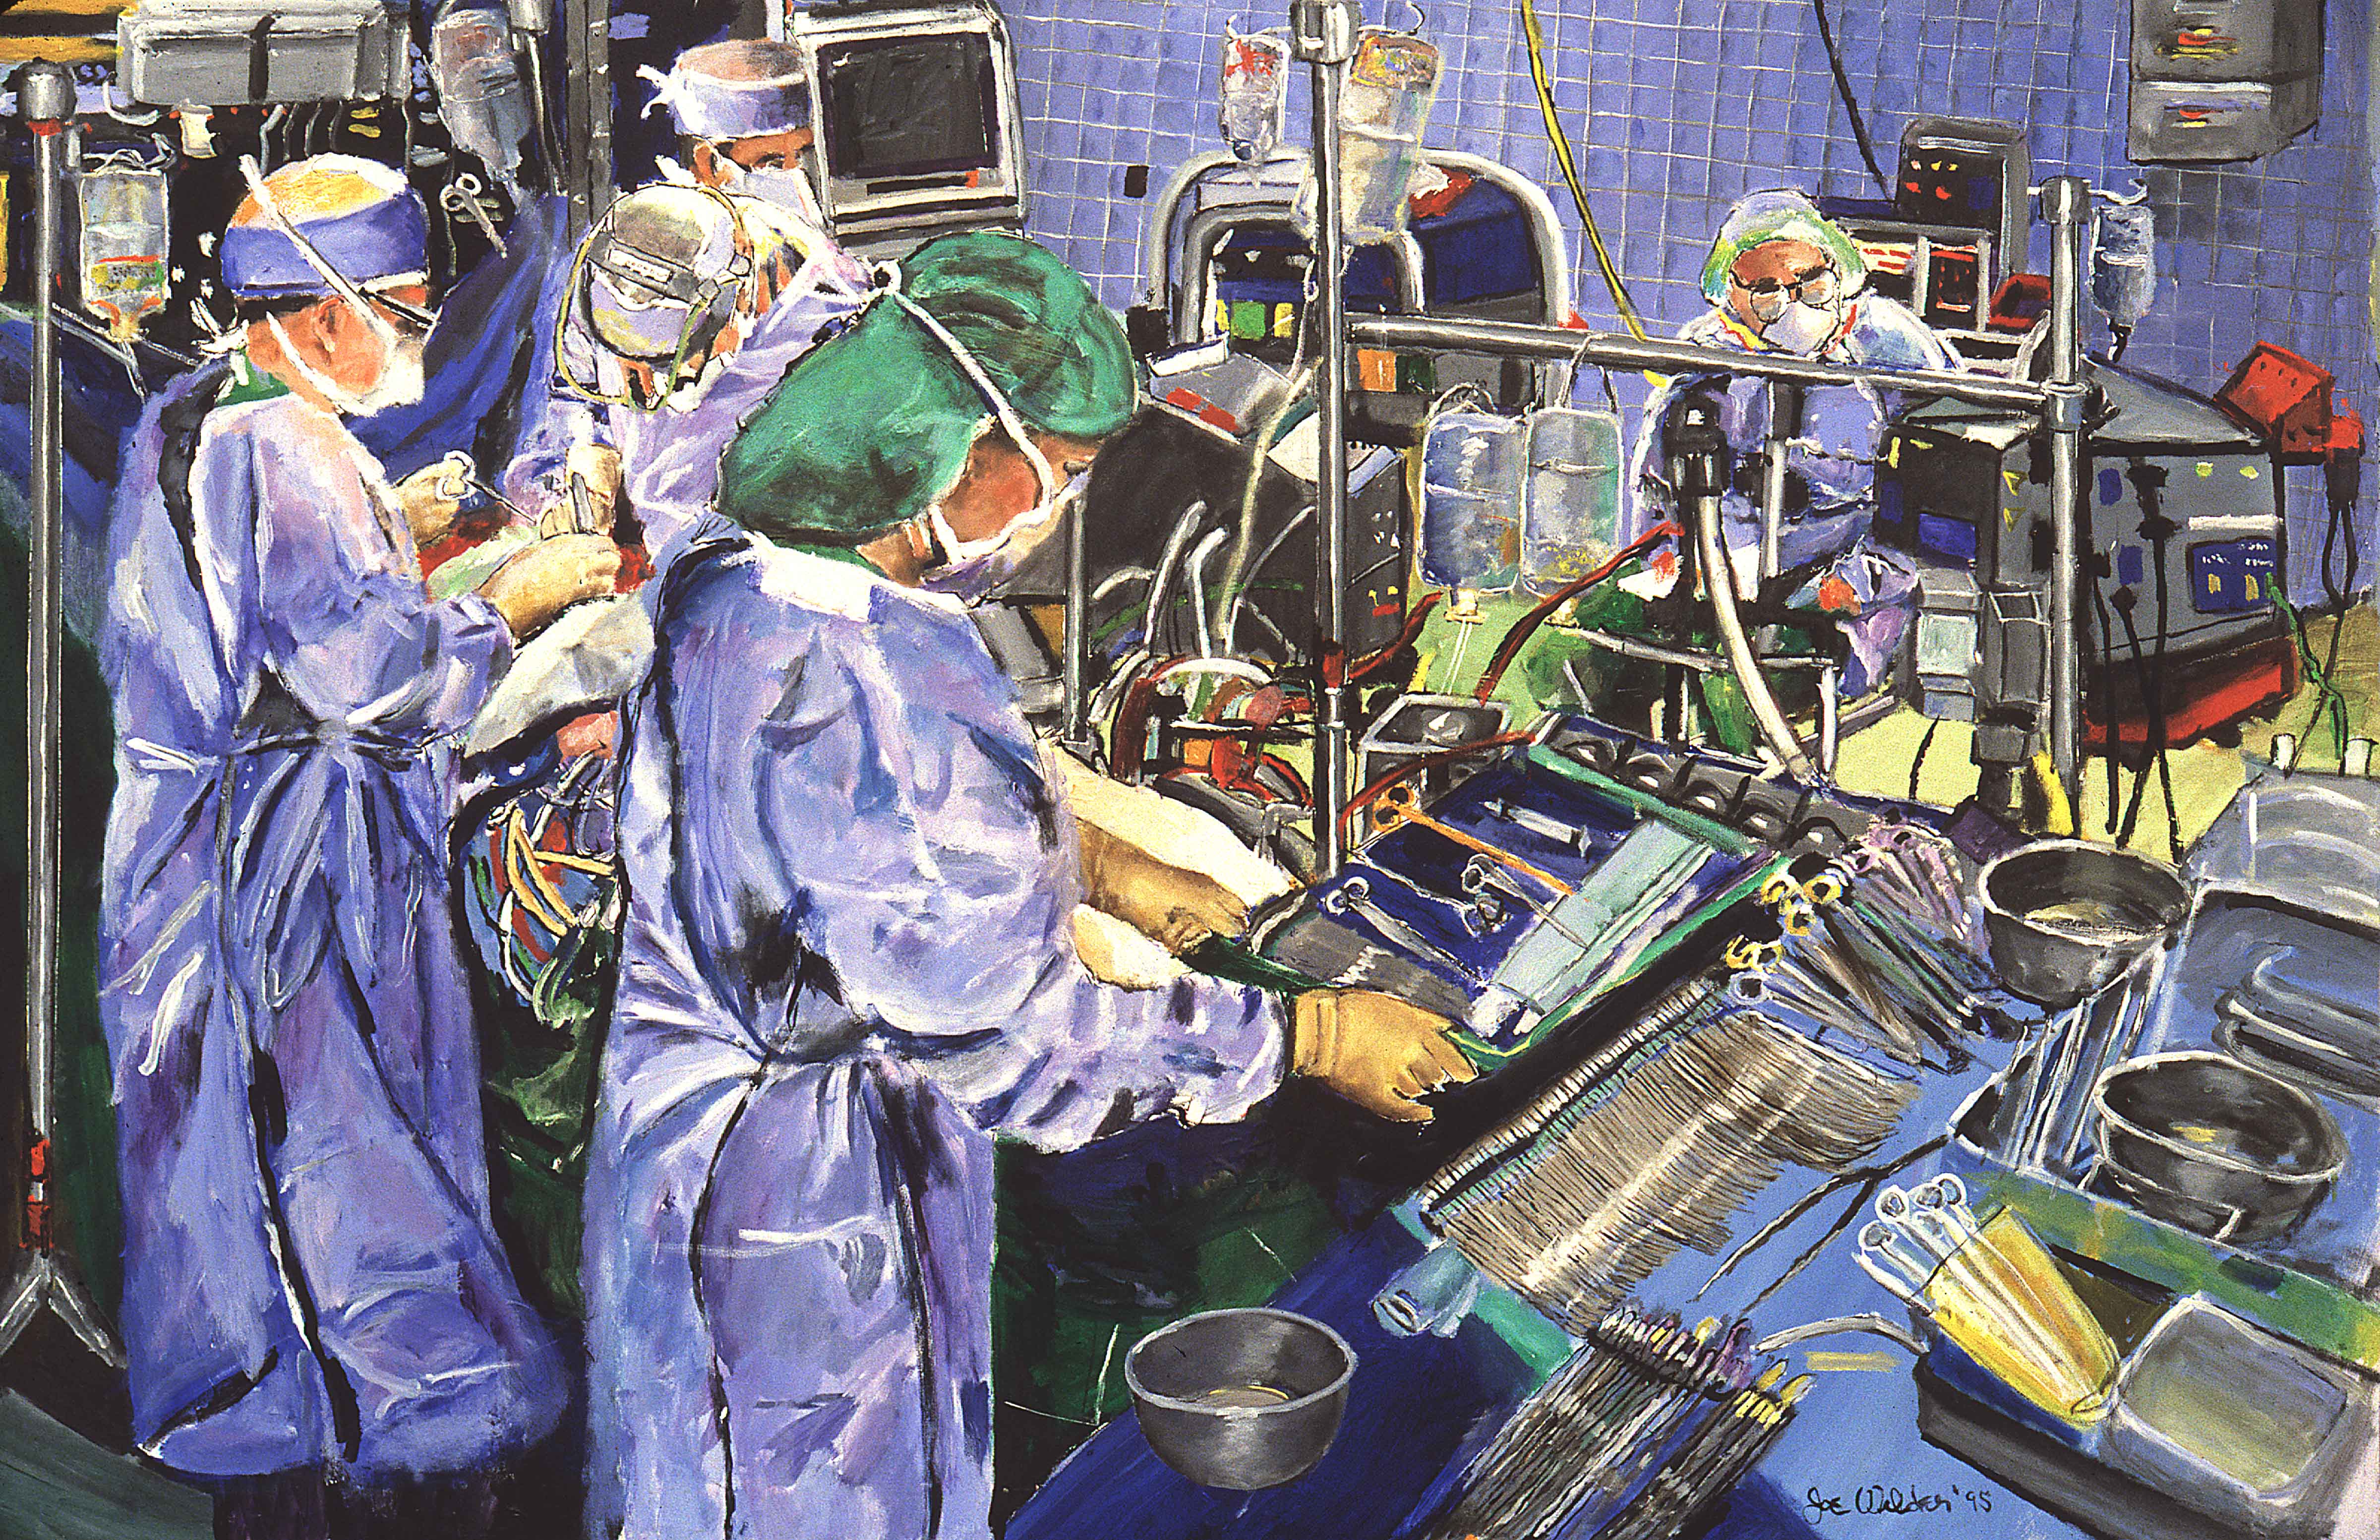 Around the operating table responsible surgeons function as a team. Click here to view painting.